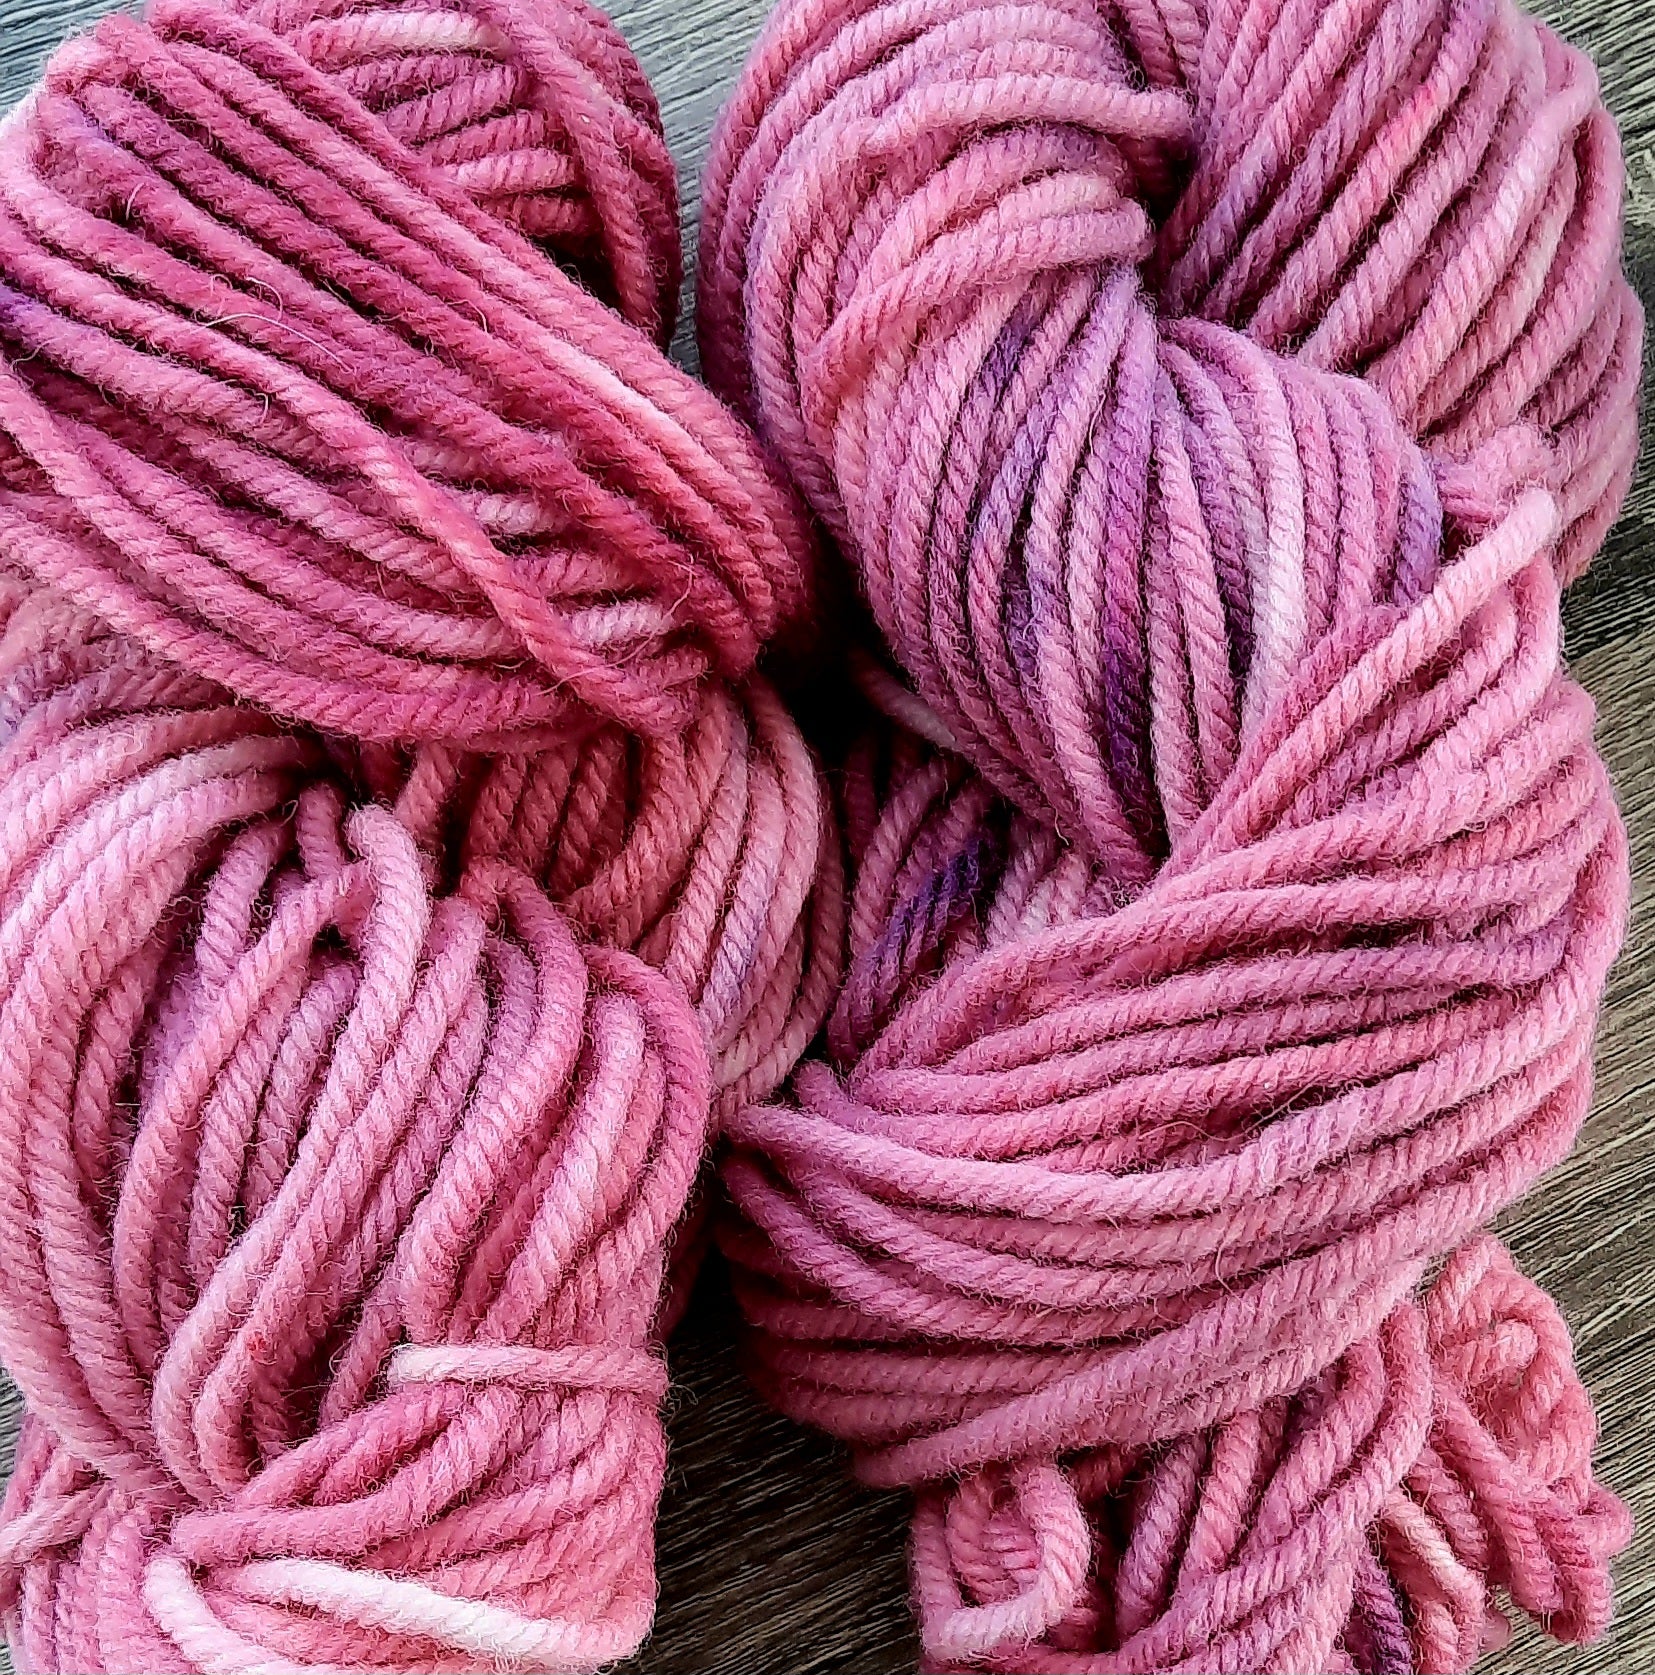 Hand-Dyed Super Bulky  (4 ply) Yarn - Berries